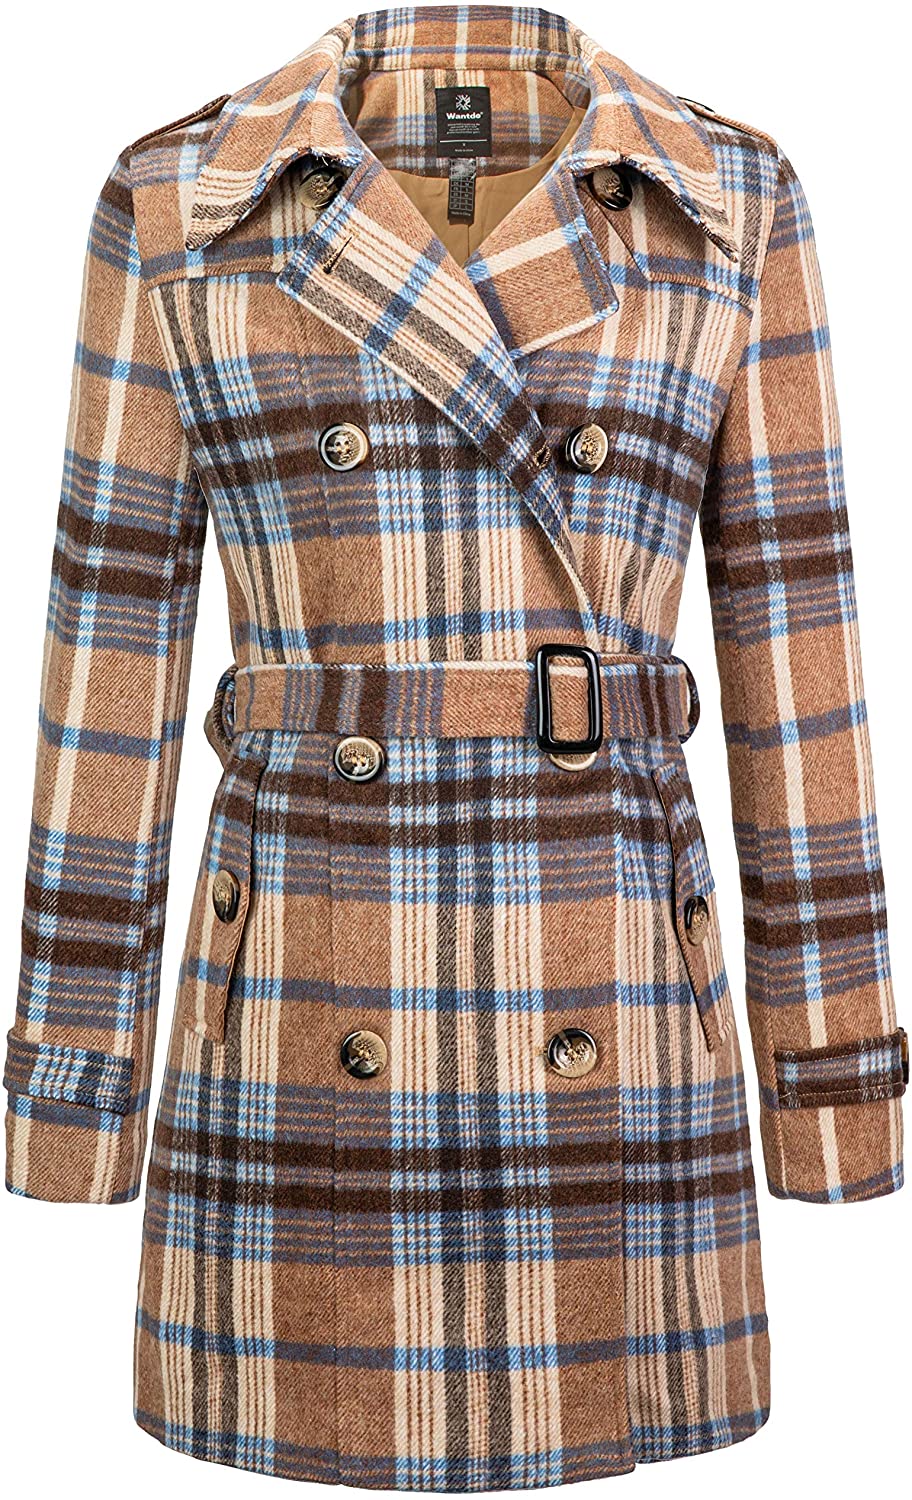 Womens Winter Woollen Blend Plaid Check Mid Length Trench Jacket Pea Coat Overcoat 